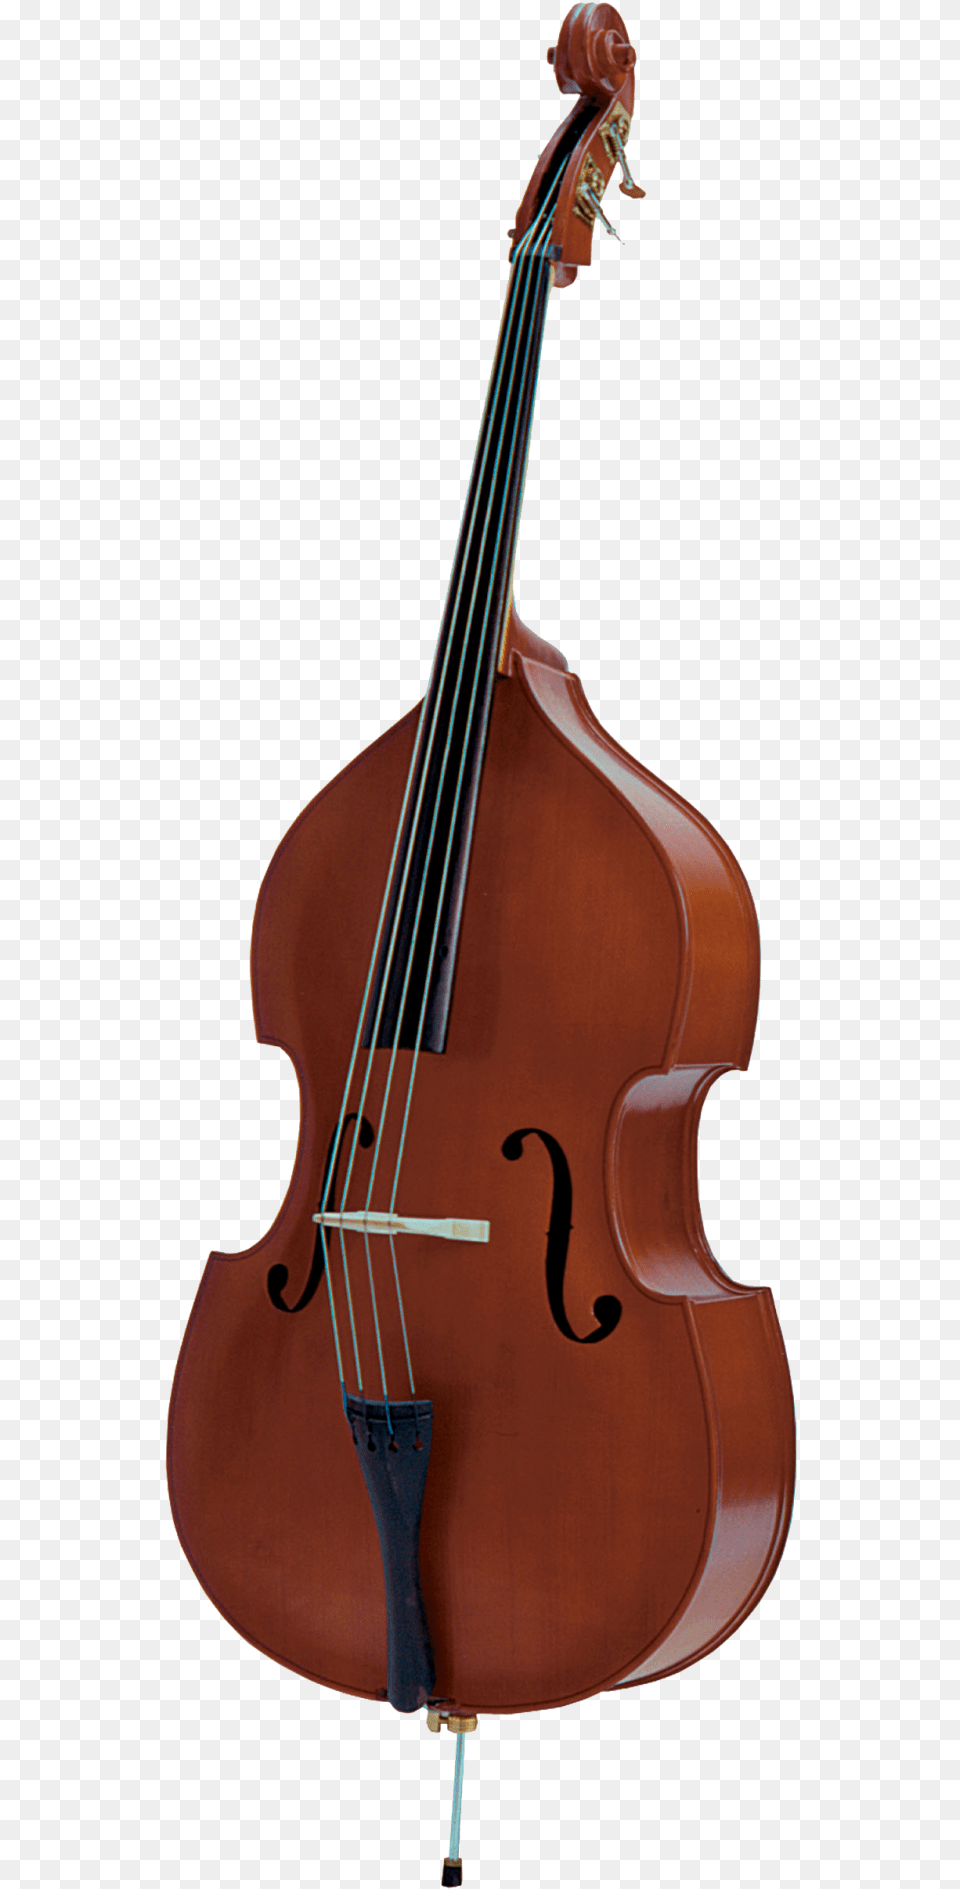 Double Bass Bass Guitar String Instruments Electric Palatino Vb, Cello, Musical Instrument, Violin Png Image